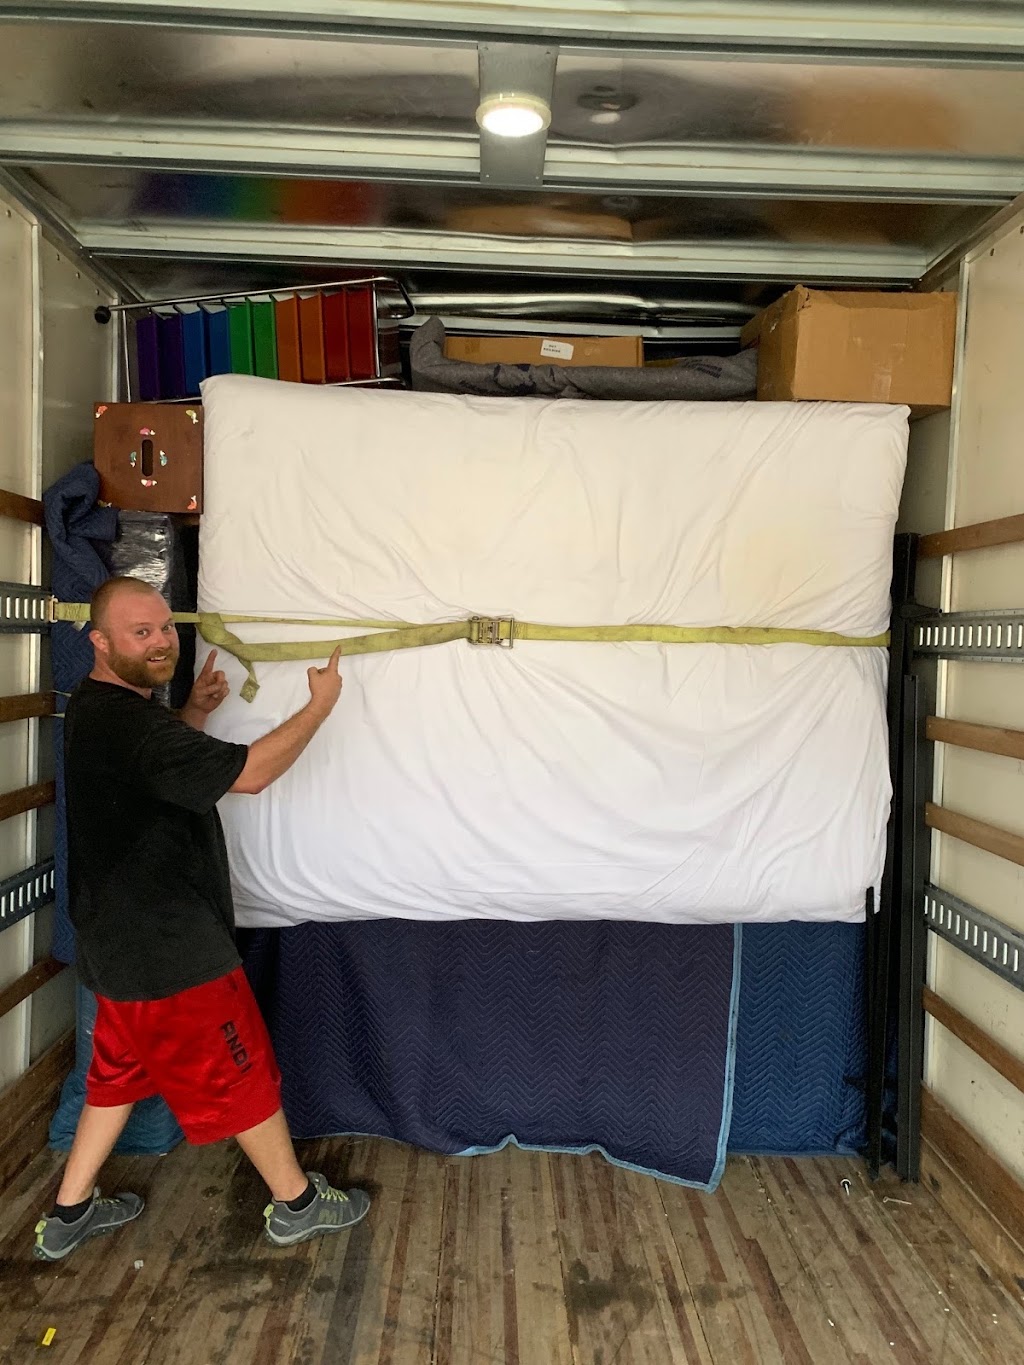 Strong College Students Movers Tampa | #200, 1717 E Busch Blvd suite 200, Tampa, FL 33612, USA | Phone: (813) 333-2468